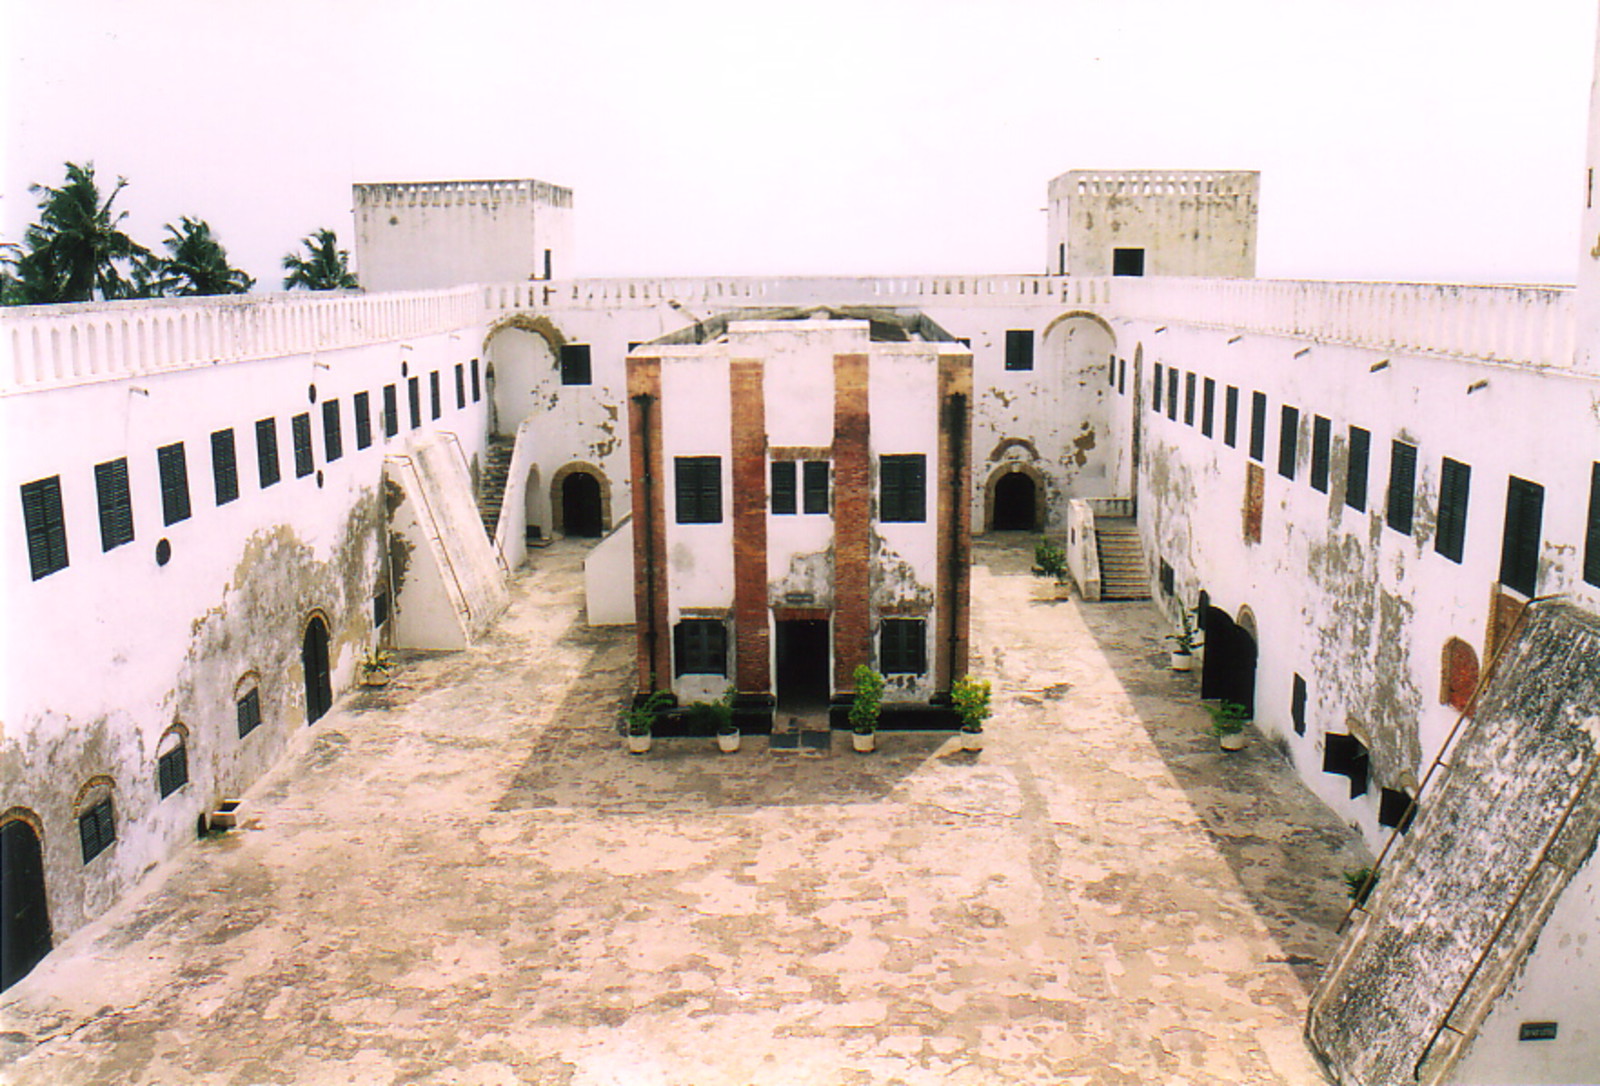 The courtyard of St George's Castle, Elmina